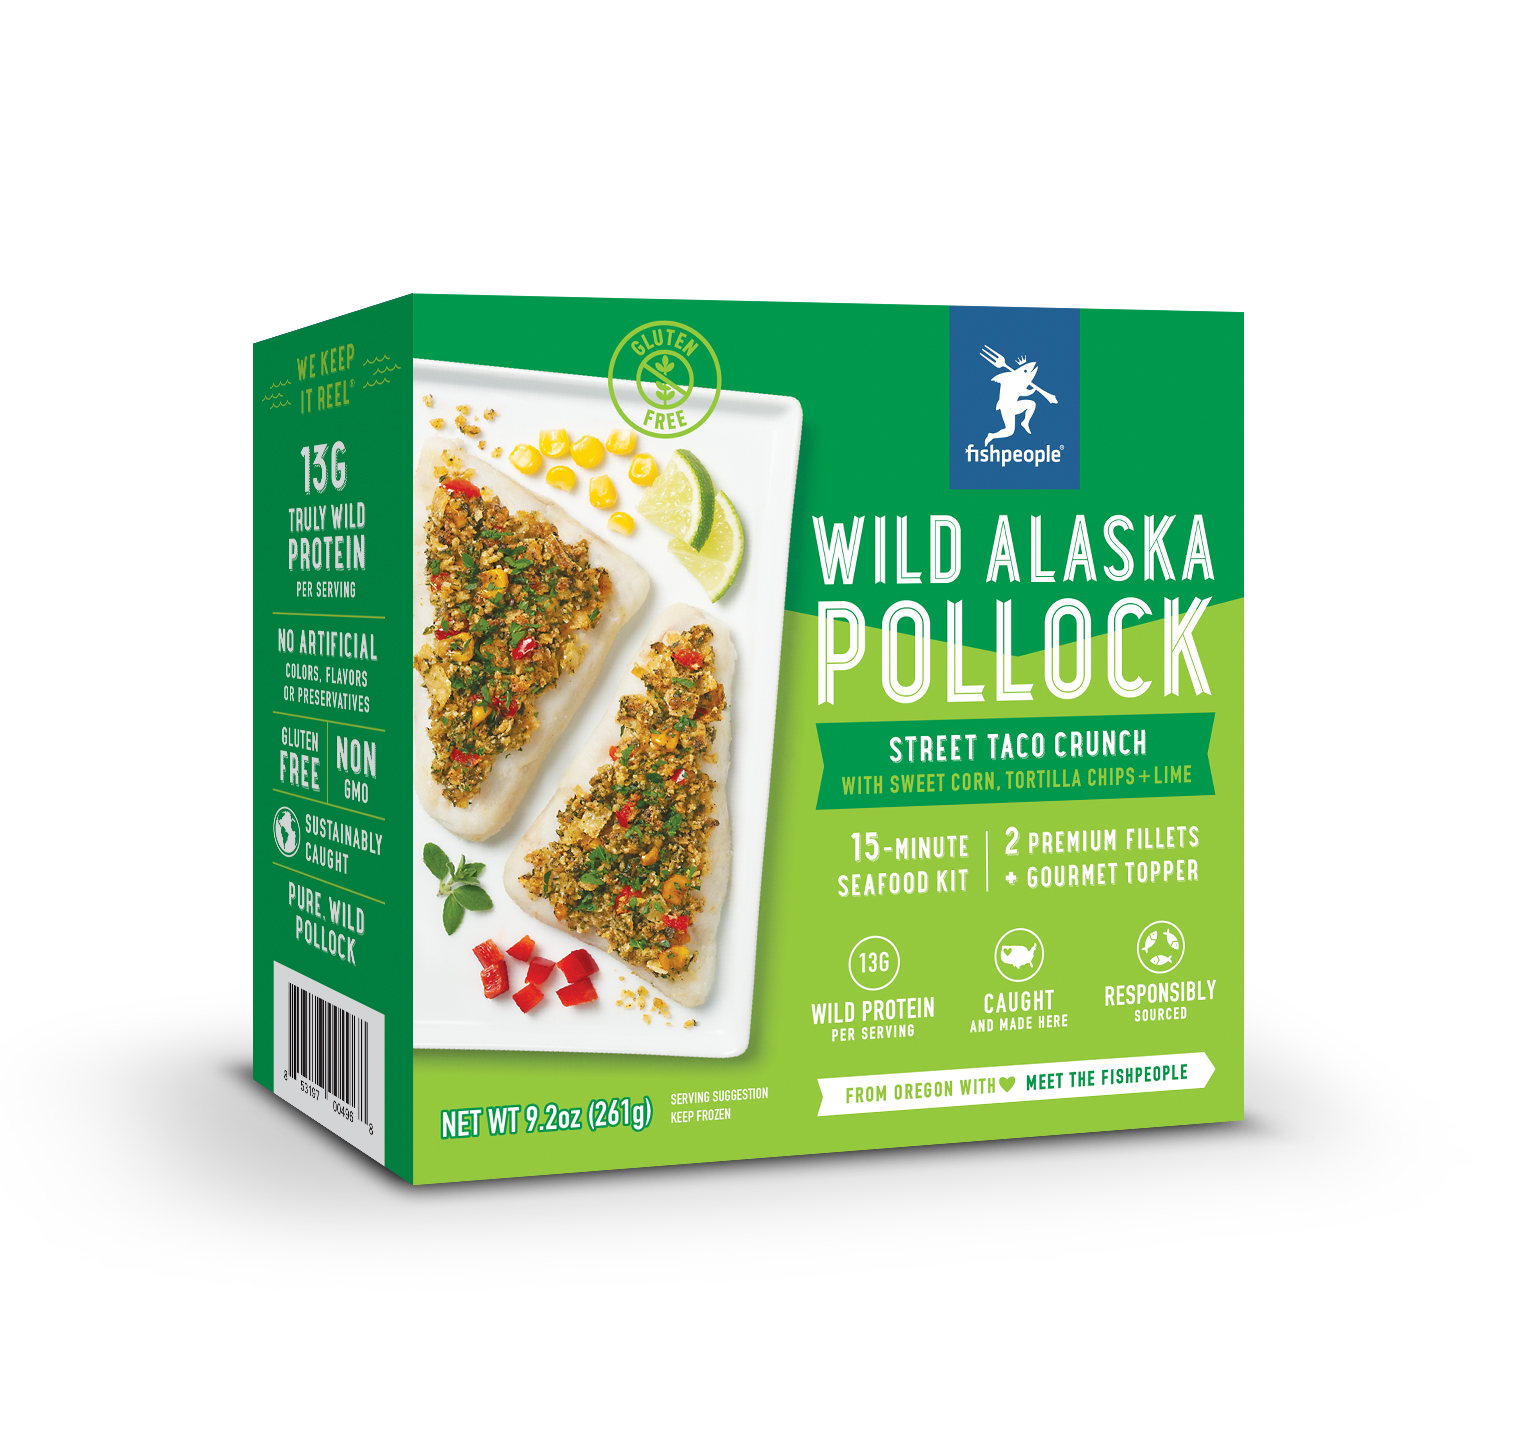 GAPP Partners With Fishpeople to Promote Meal Kits Featuring Wild Alaska Pollock